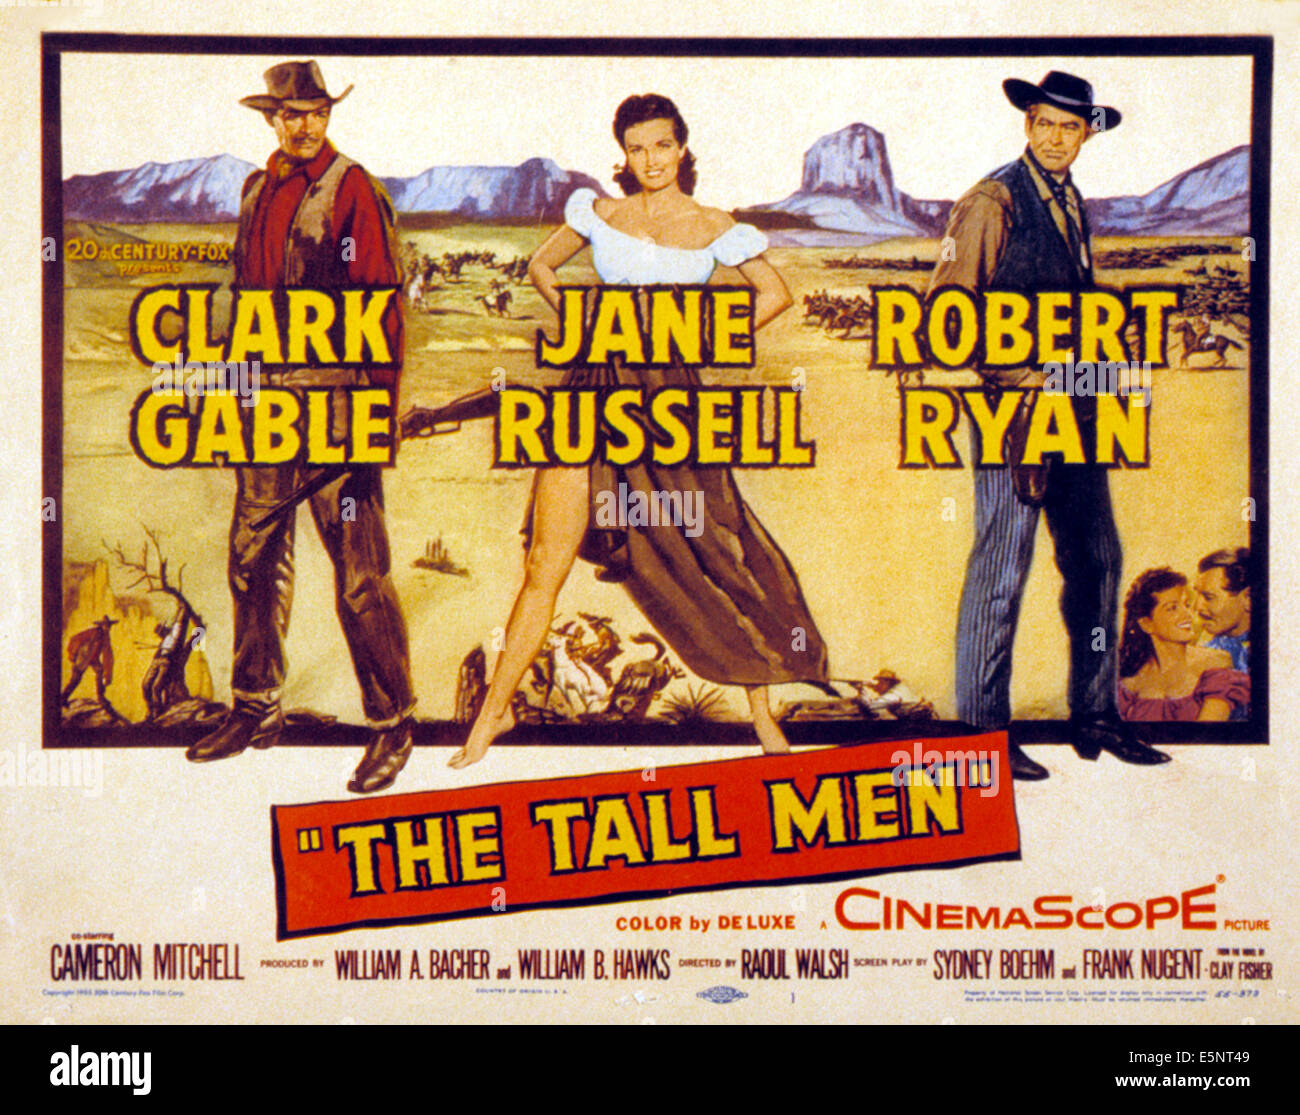 THE TALL MEN, Clark Gable, Jane Russell, Robert Ryan, 1955. TM and Copyright © 20th Century Fox Film Corp. All rights reserved. Stock Photo